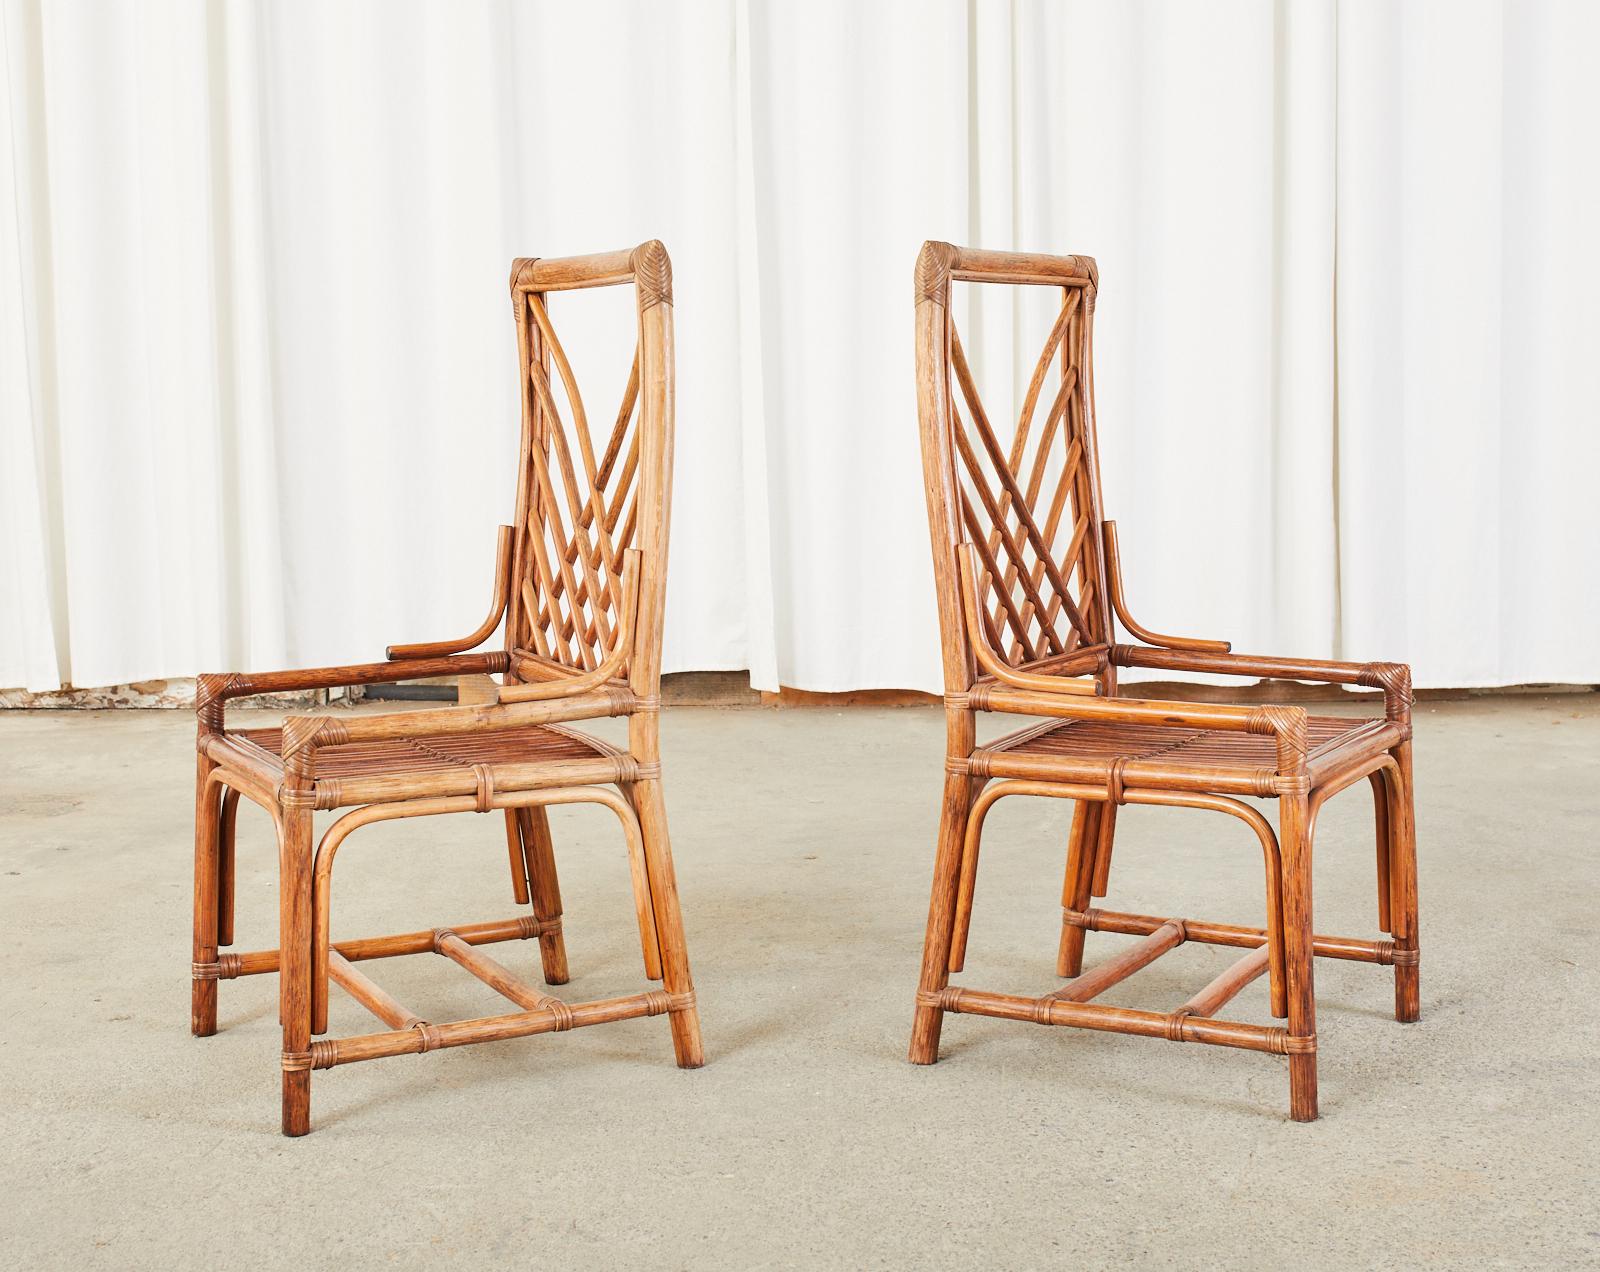 Asian Set of Four Organic Modern Rattan Wicker Dining Chairs